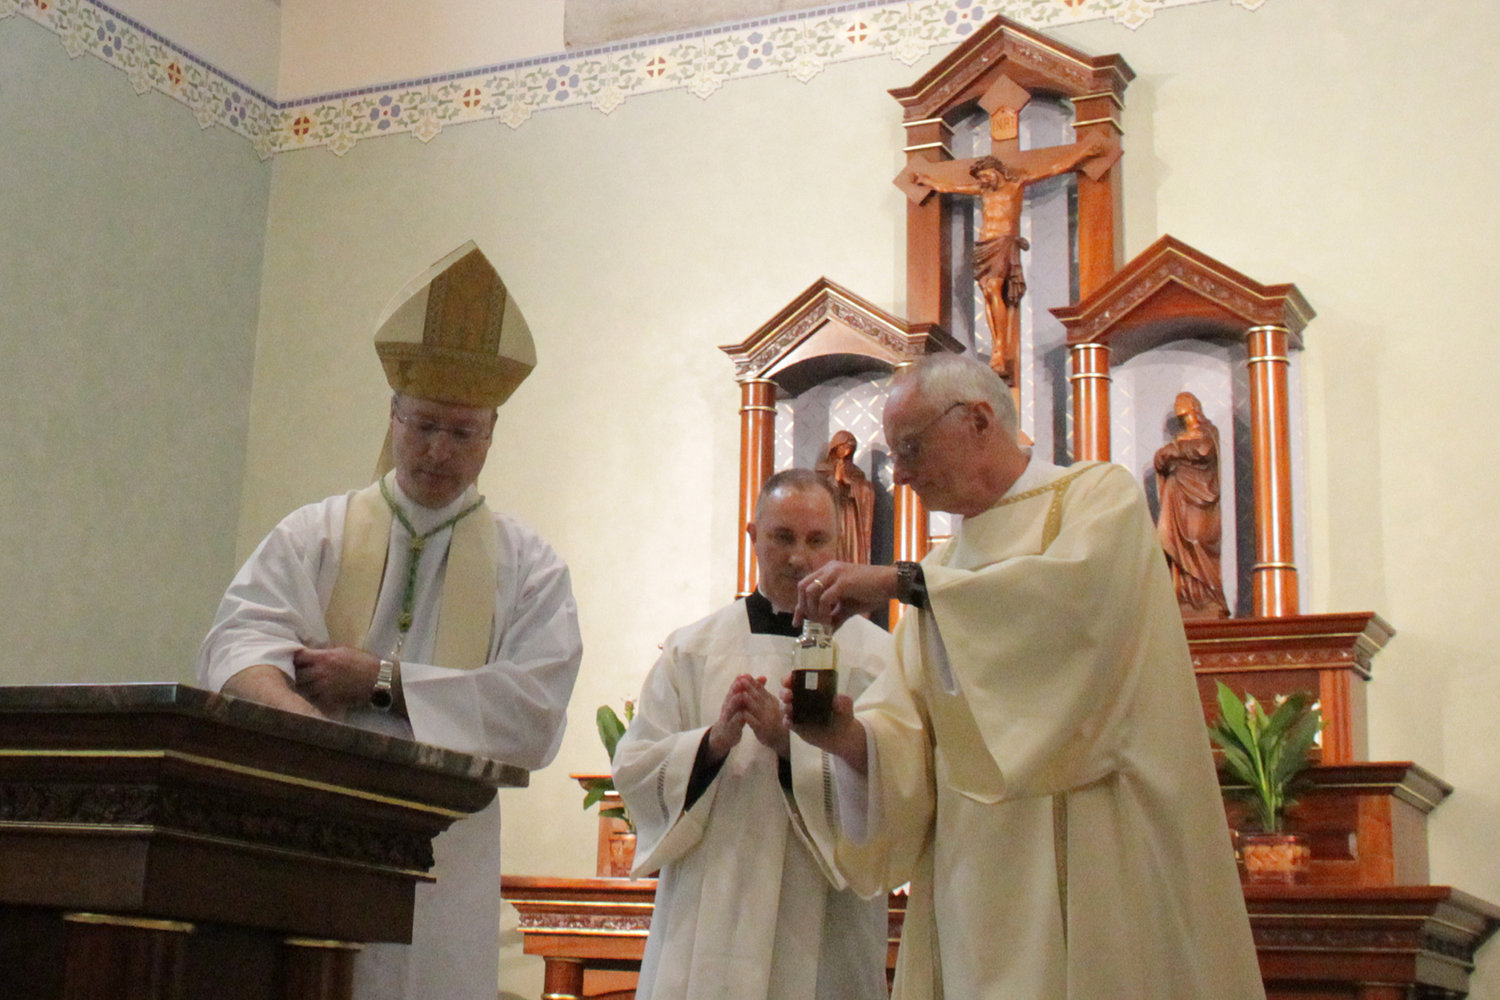 Bishop W. Shawn McKnight consecrates the new altar in St. Stanislaus Church in Wardsville with the Oil of Sacred Chrism. Assisting him is Deacon Alan Sims of the Wardsville parish and Father Louis Nelen, pastor of Cathedral of St. Joseph parish in Jefferson City, serving as master of ceremonies.